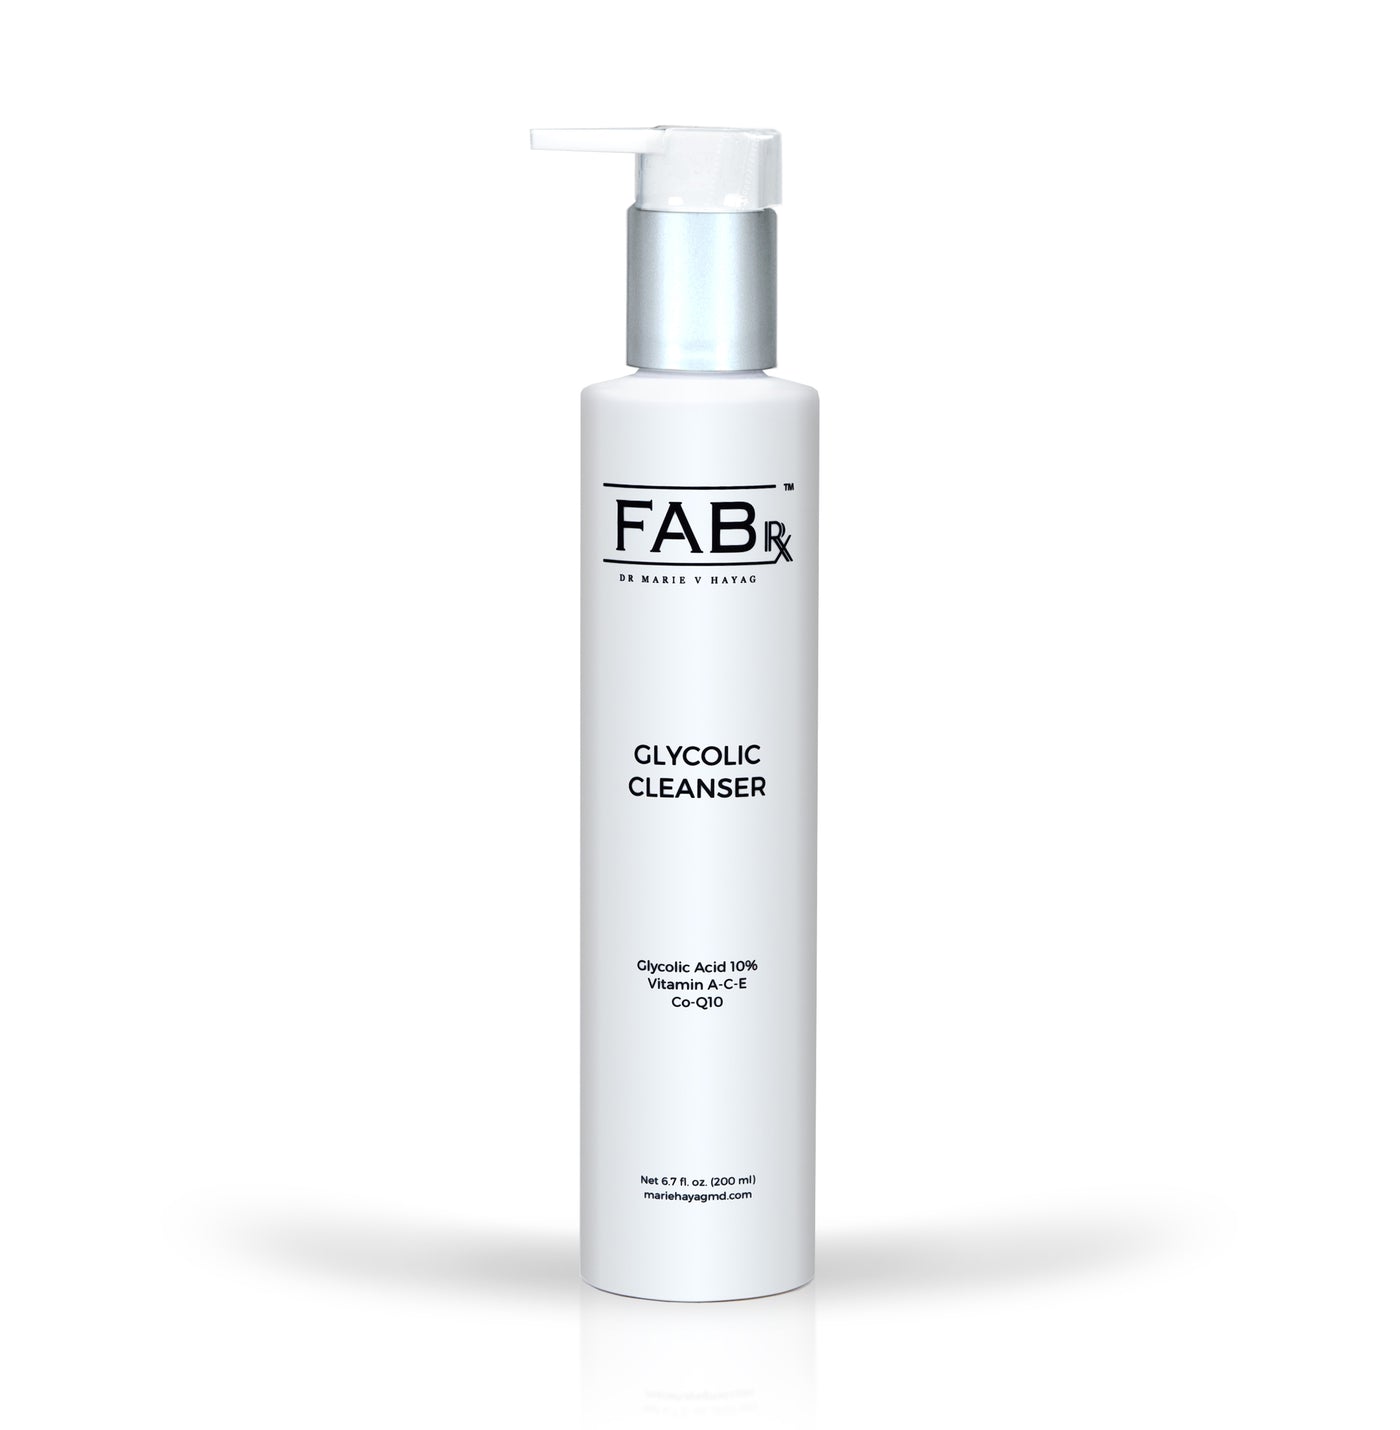 FABrx Glycolic Cleanser